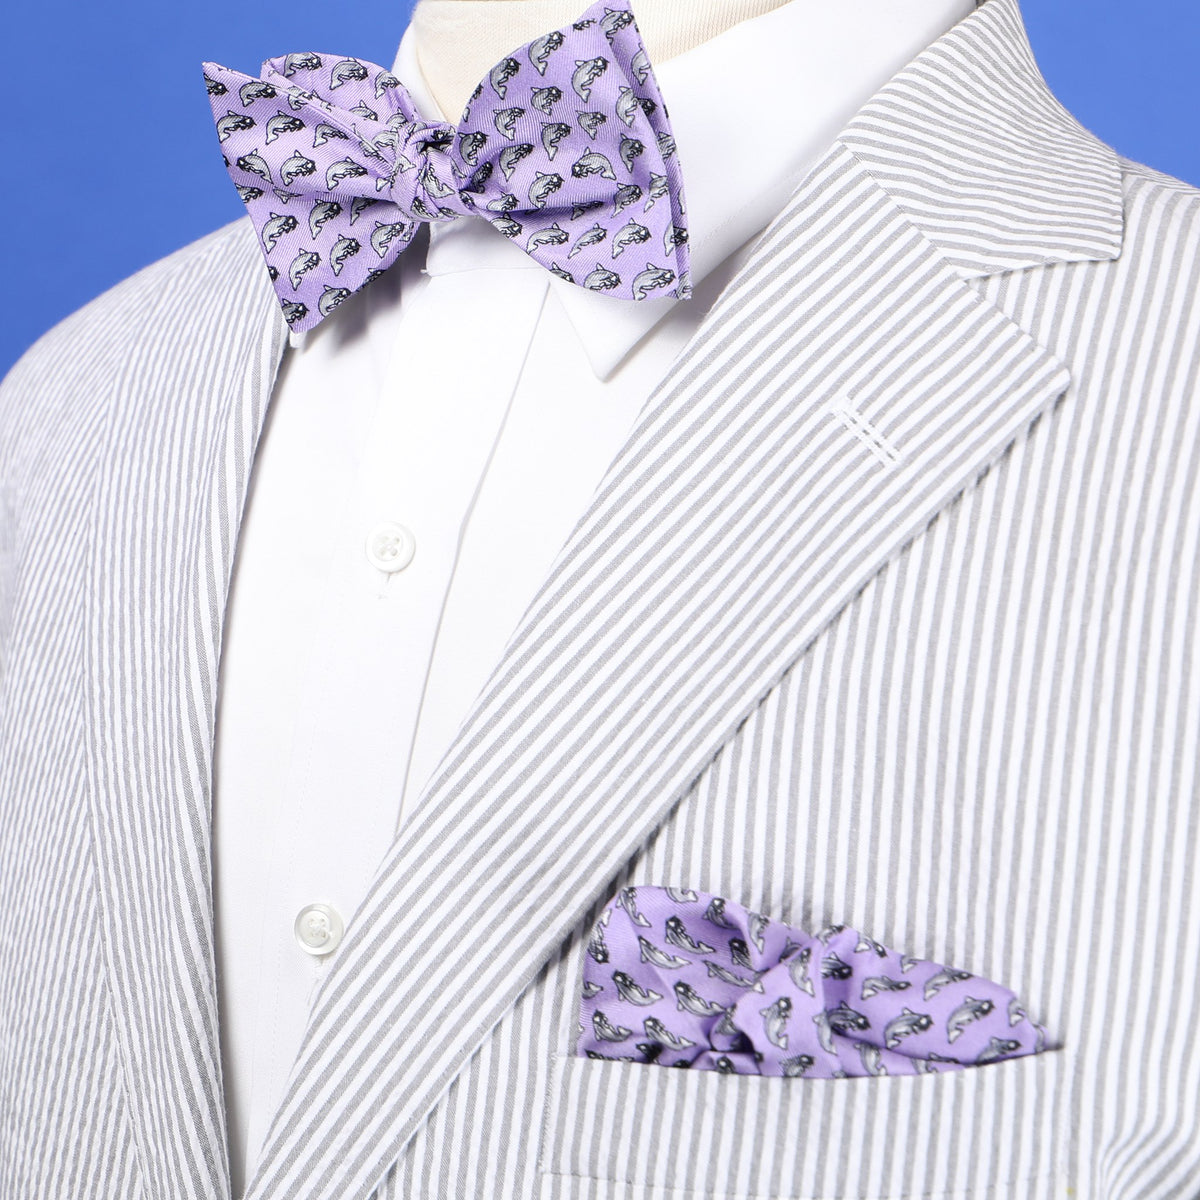 Limited Edition NOLA Couture X Haspel Lavender Catfish Print Bow Tie - O/S